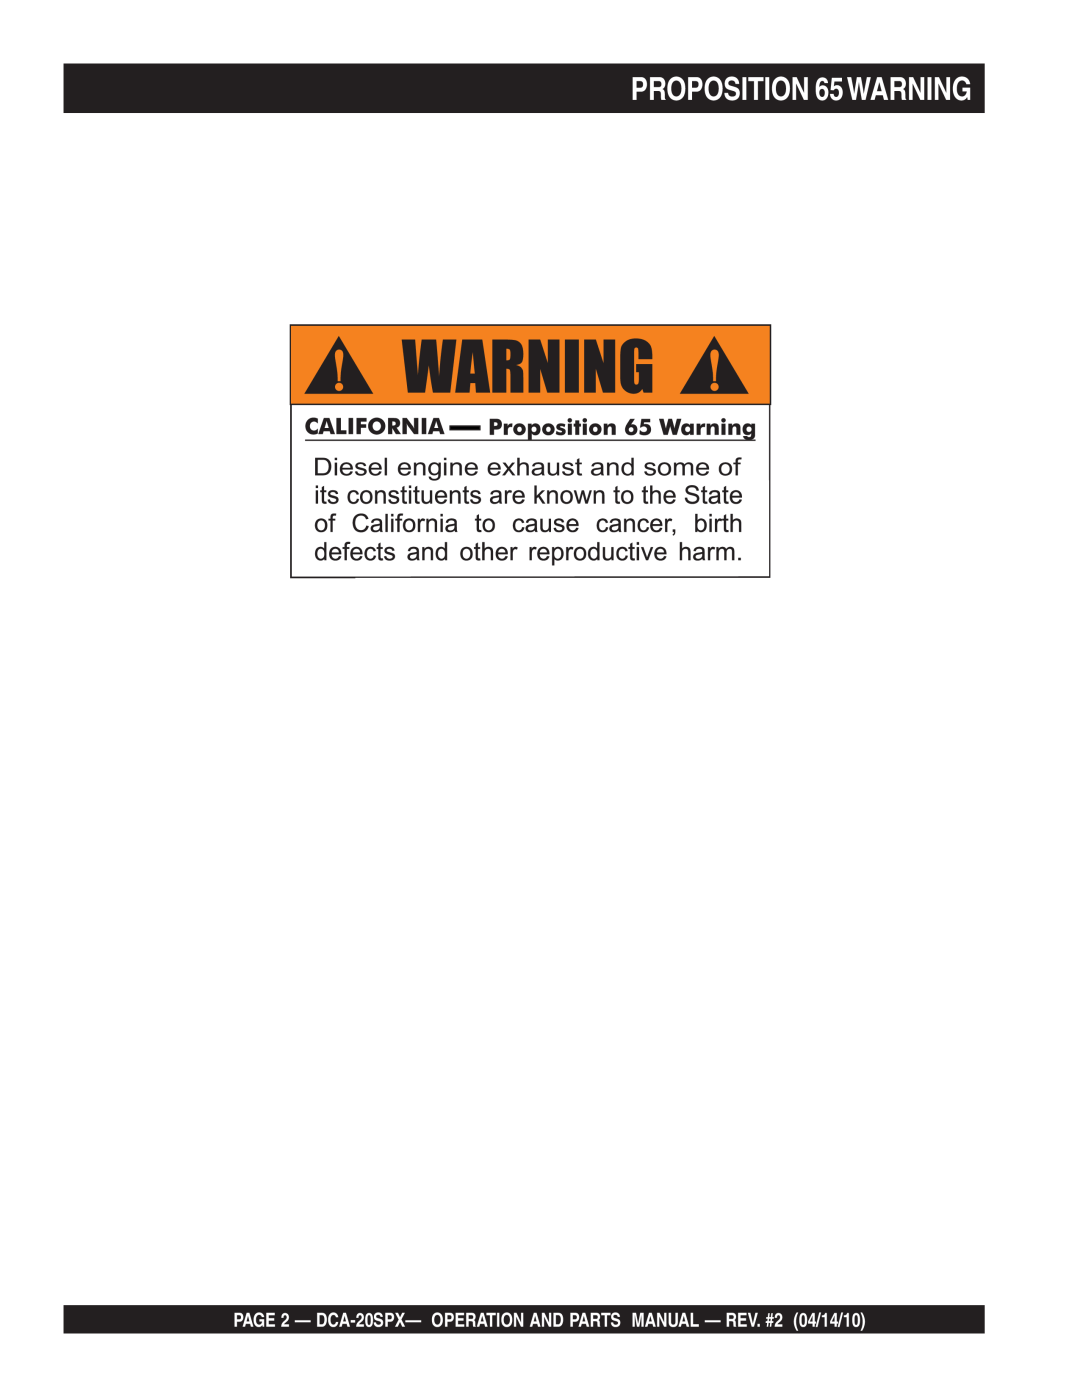 Multiquip DCA-20SPX operation manual PROPOSITION 65WARNING, Diesel engine exhaust and some of 